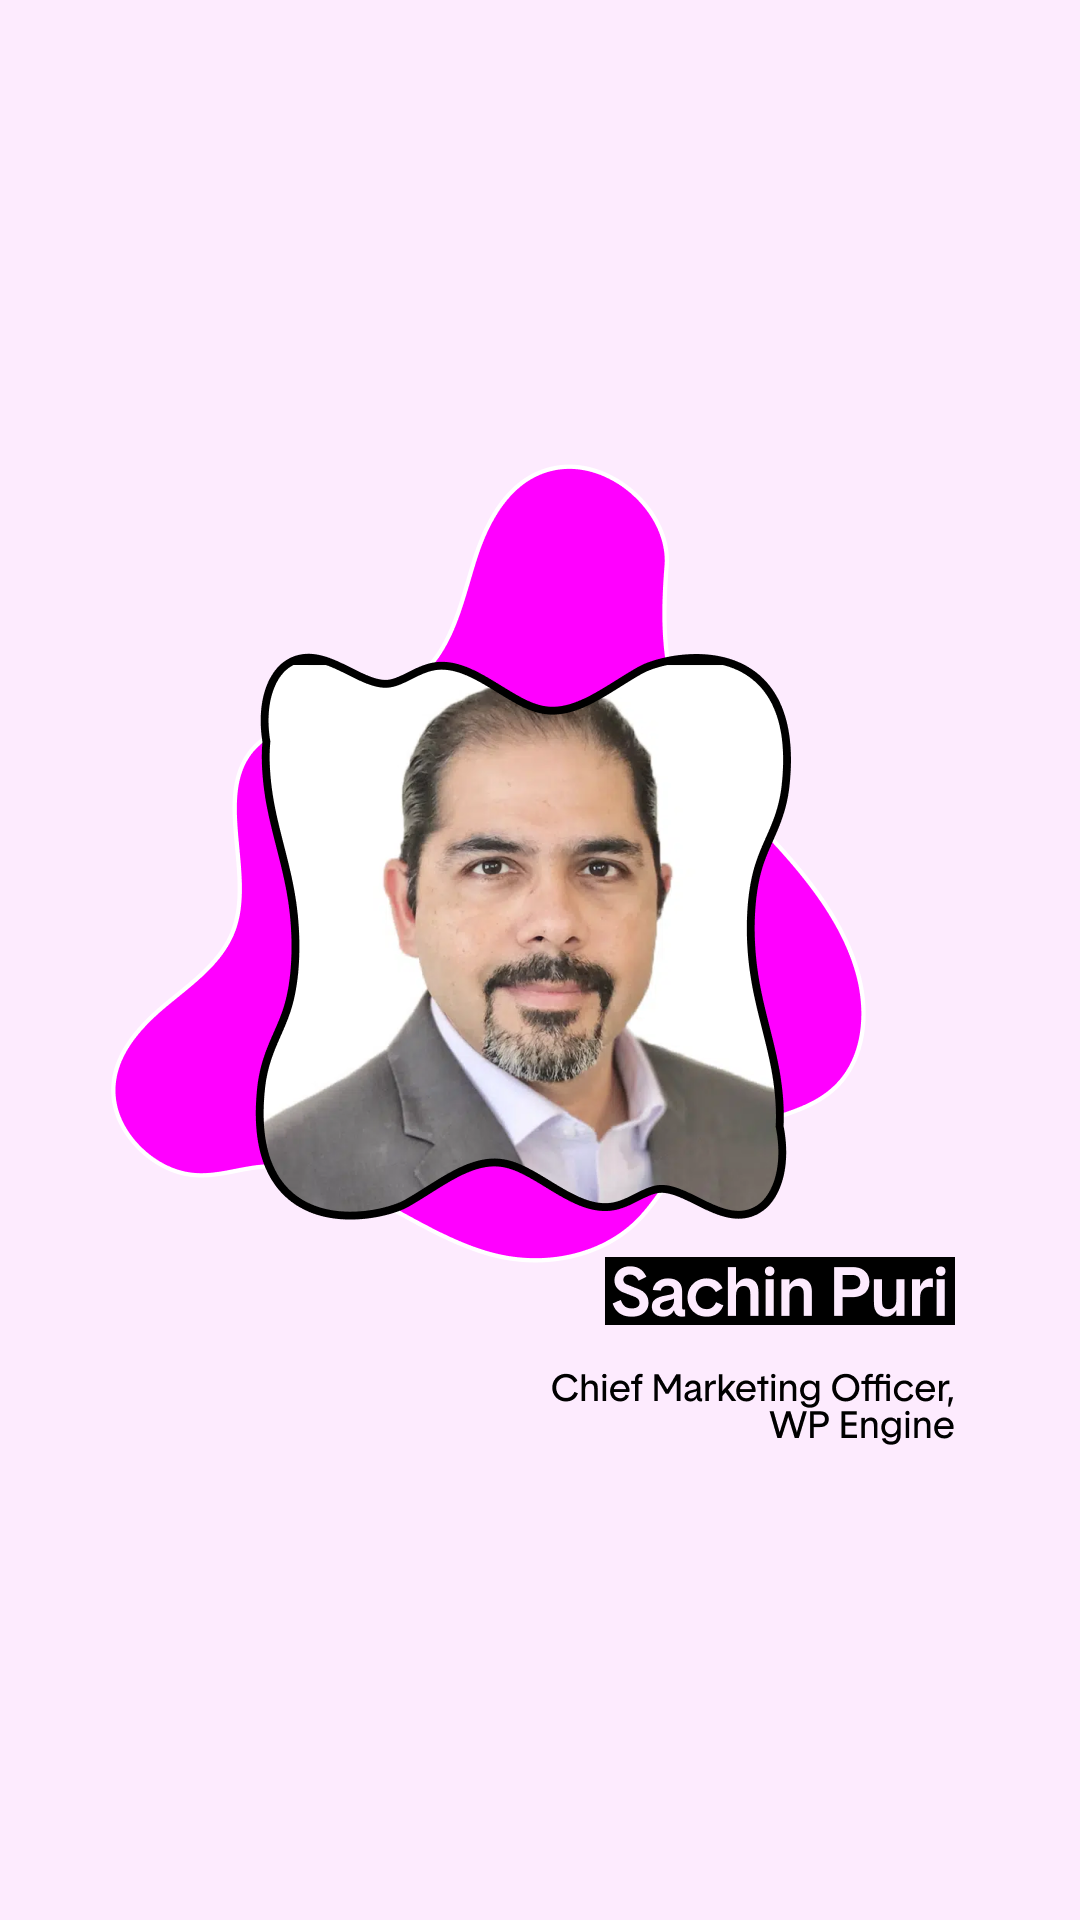 Webby Awards Feature - Insights from Experts: Sachin Puri on Gen Z’s Focus on Authenticity